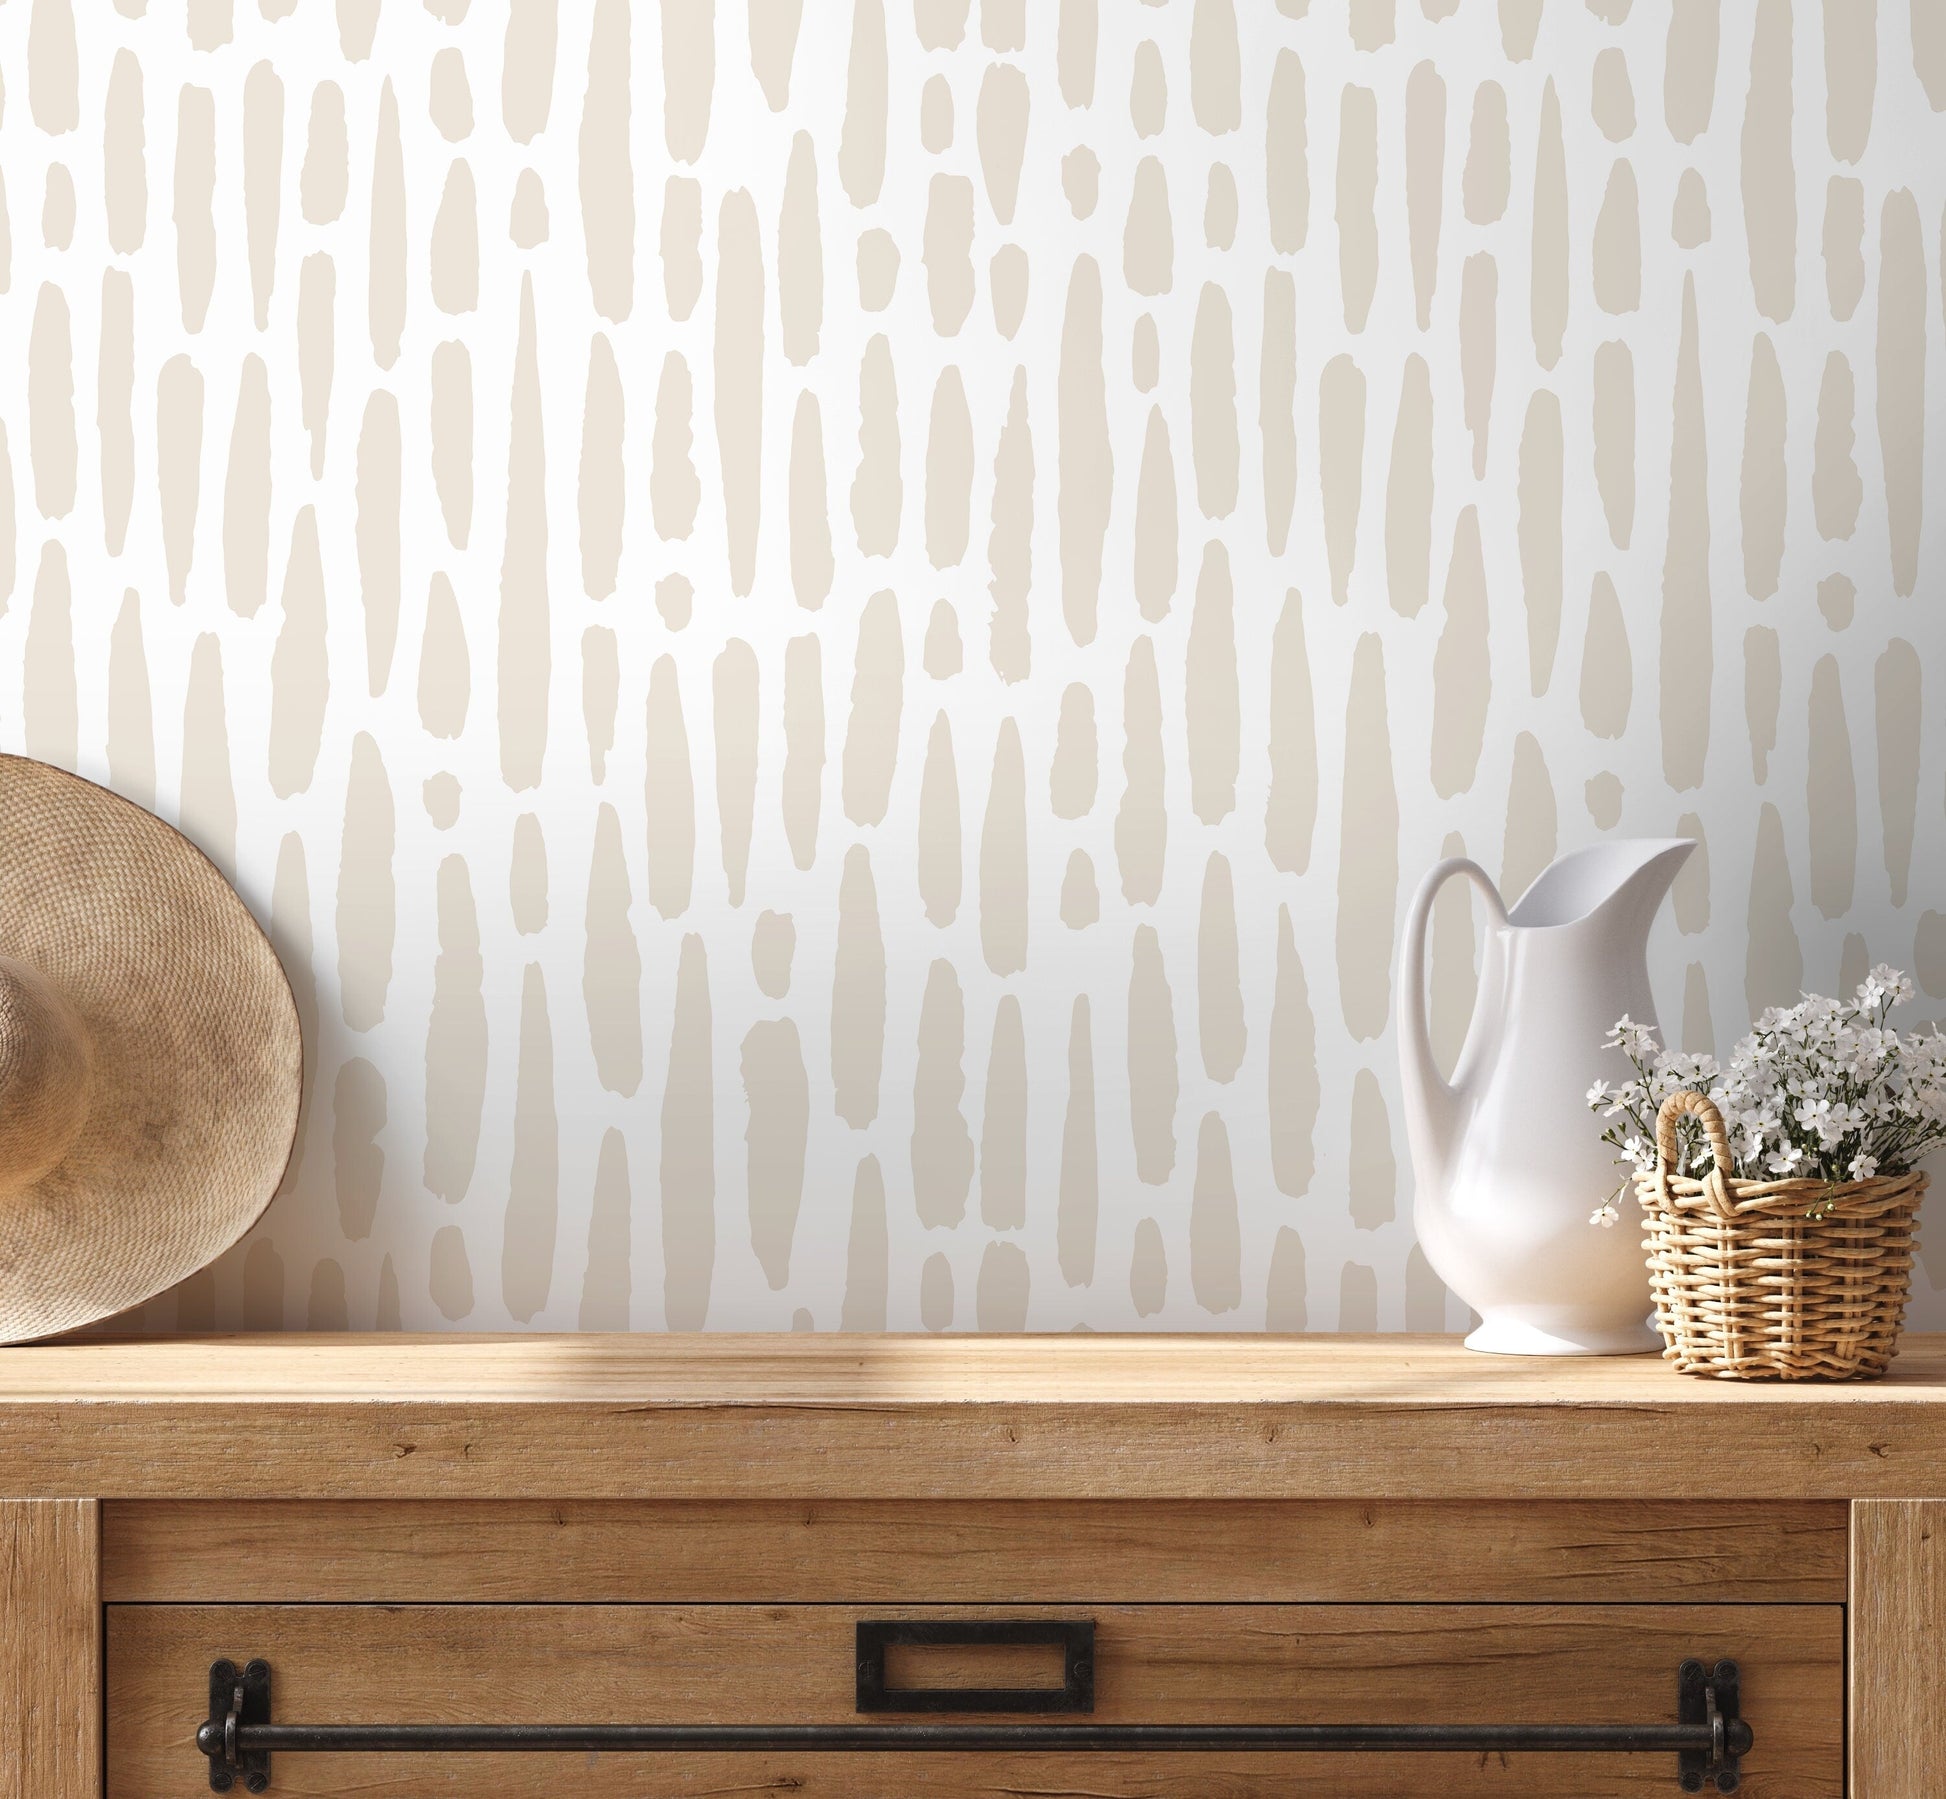 Paint Brush Dotted in Sand Wallpaper Abstract Removable and Repositionable Peel and Stick or Traditional Pre-pasted Wallpaper - ZACJ